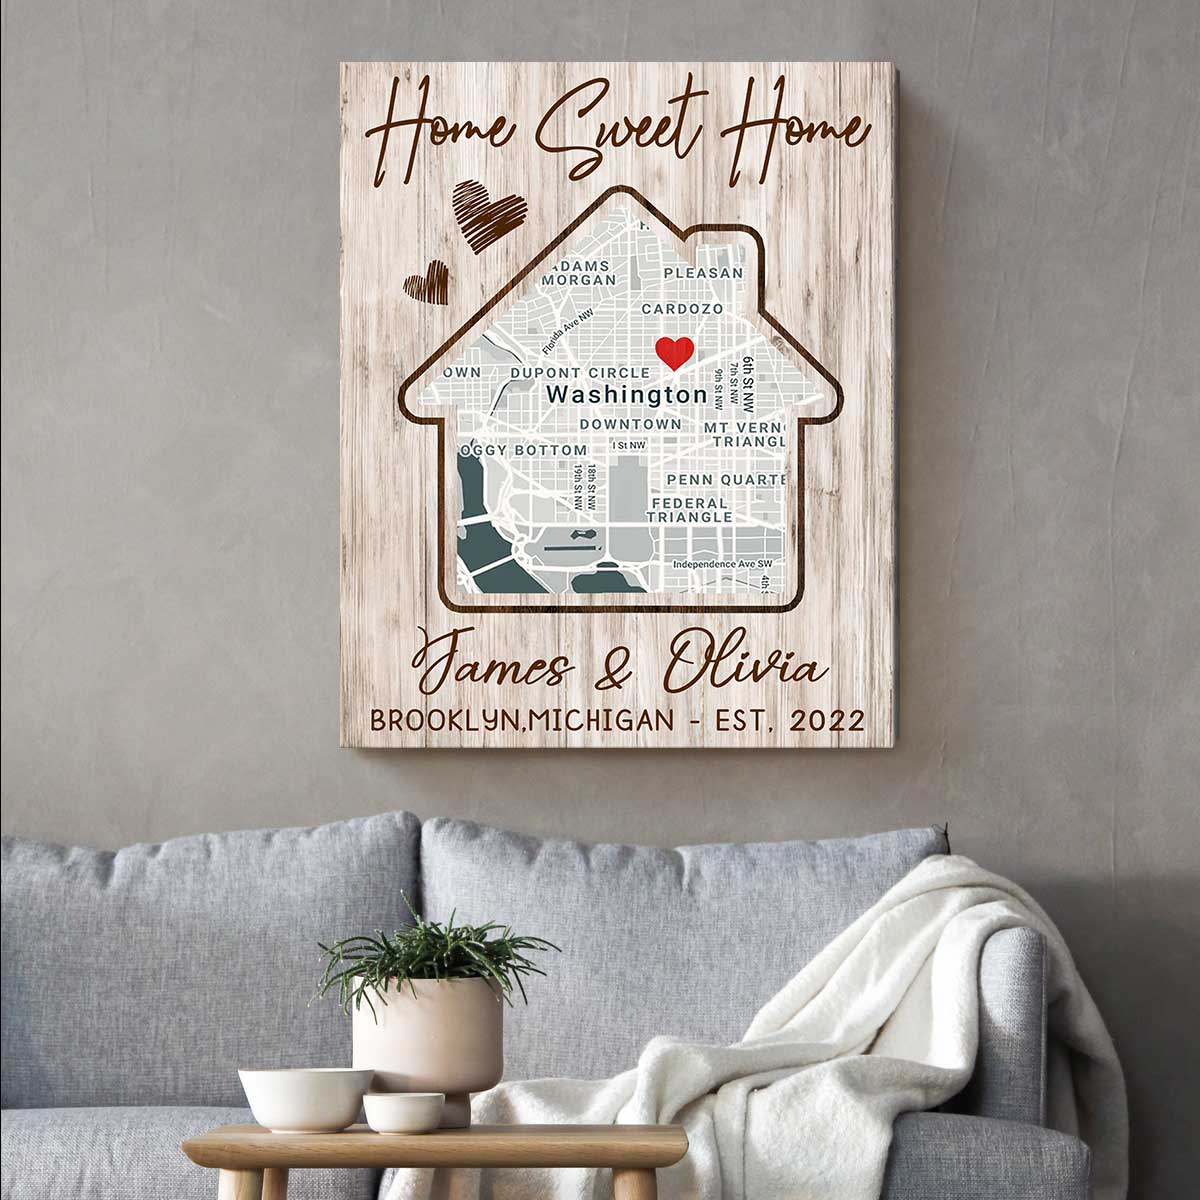 Housewarming Gift First Home, New Home Personalized Canvas